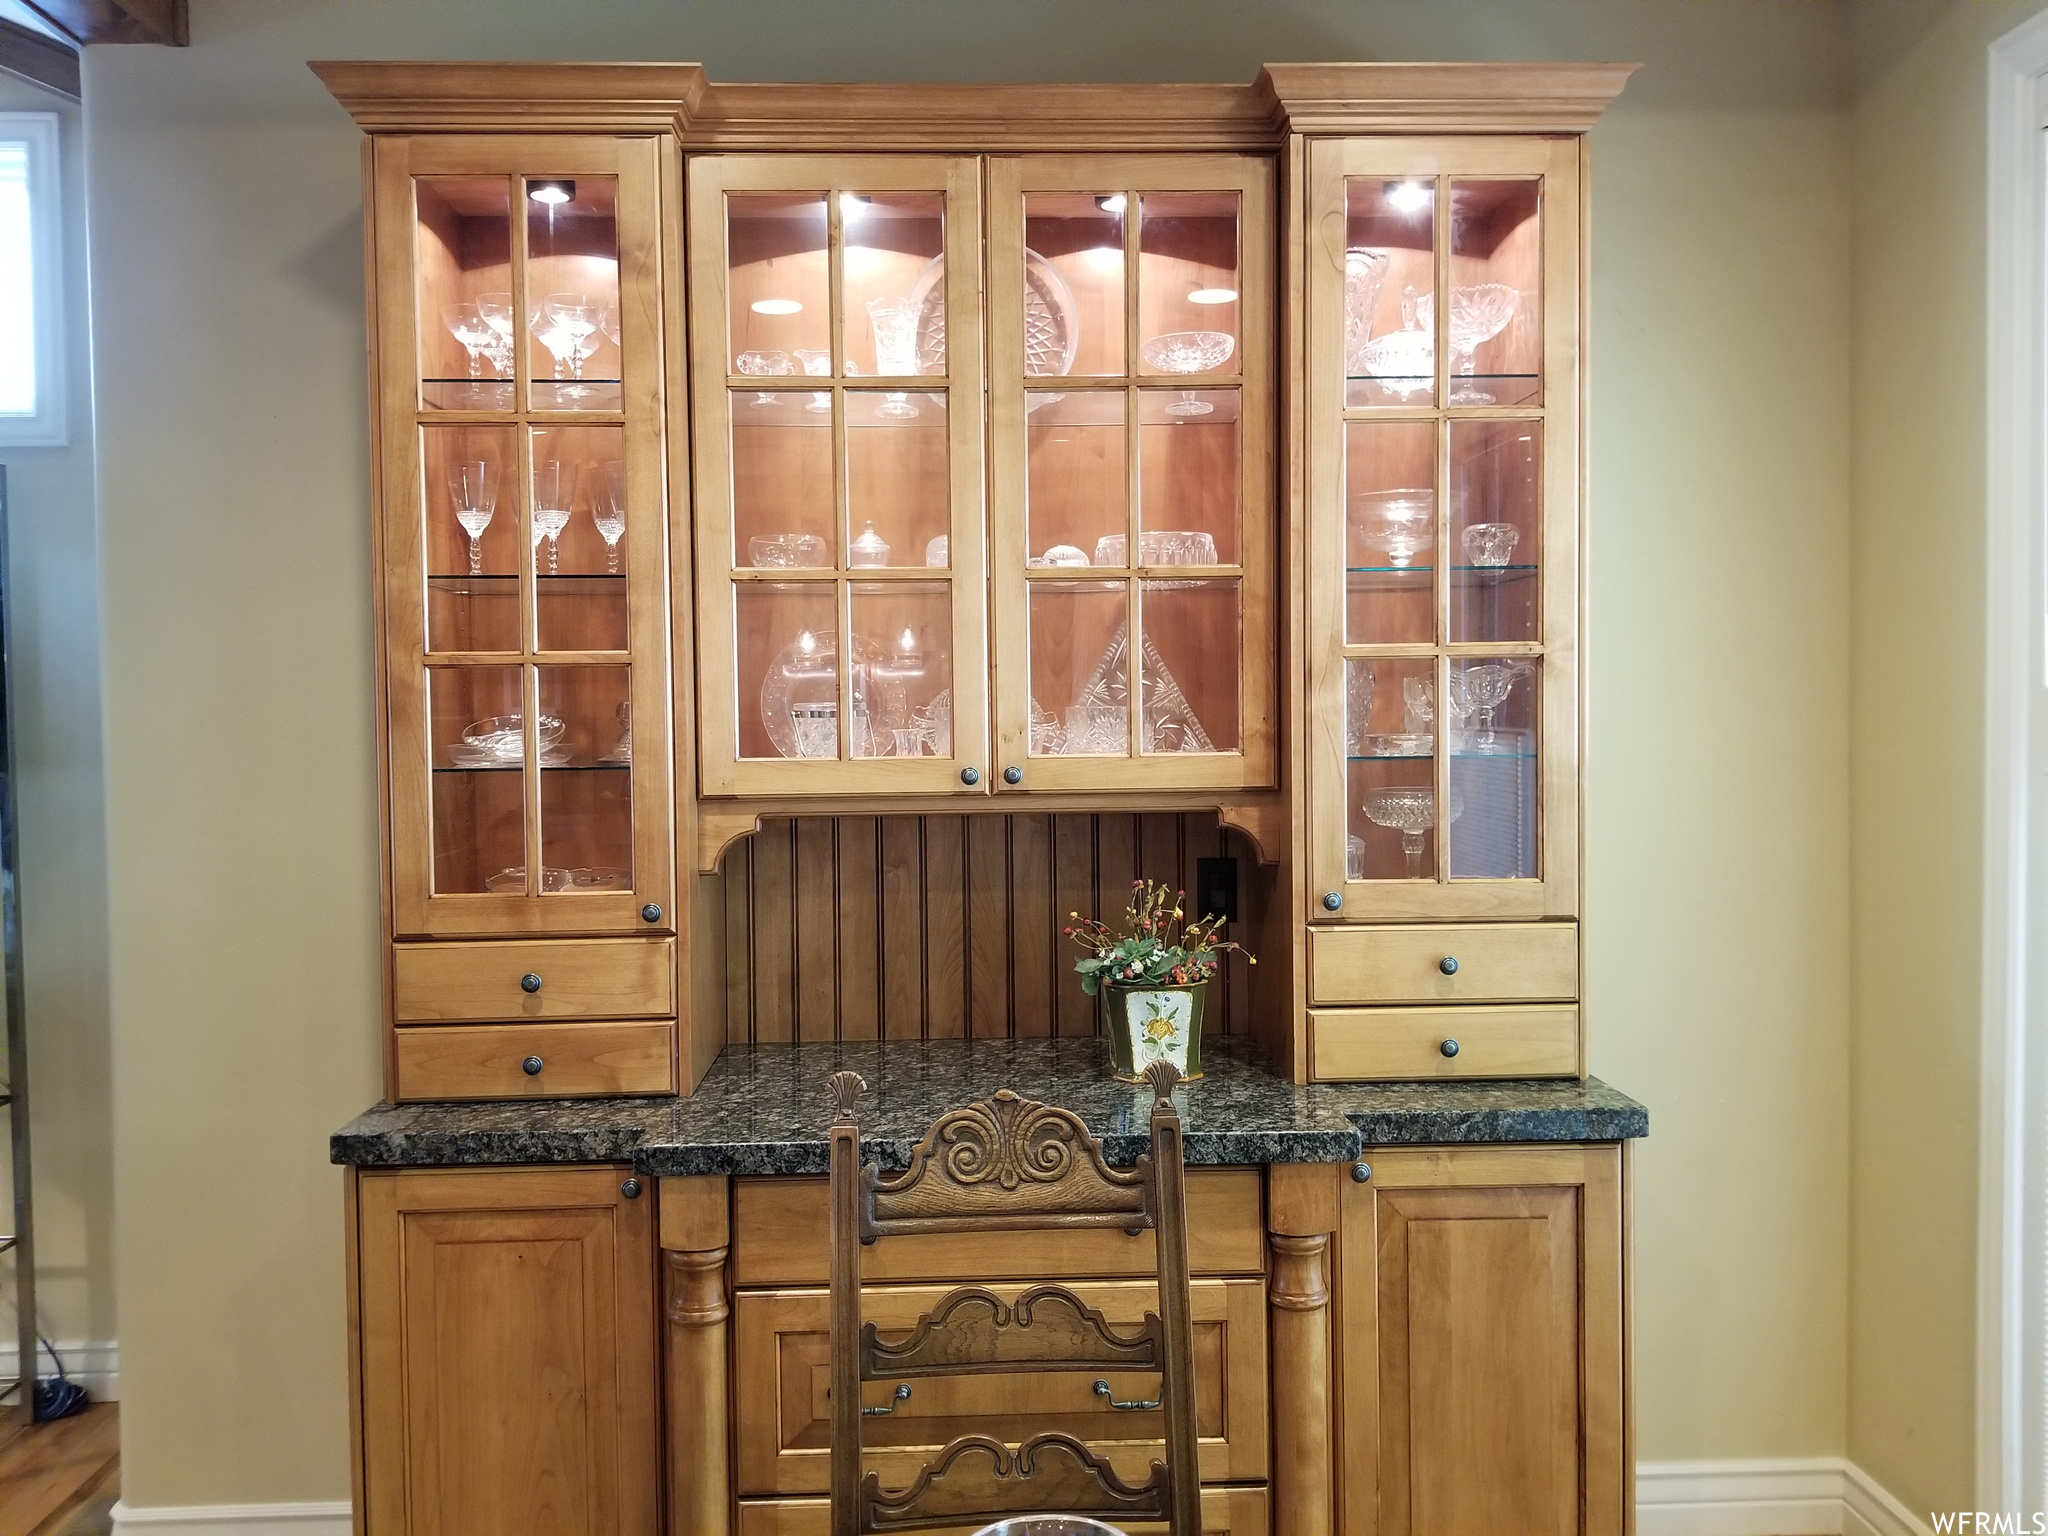 : The lighted built in hutch has a granite countertop and drawers and shelving for all your fine collectibles.